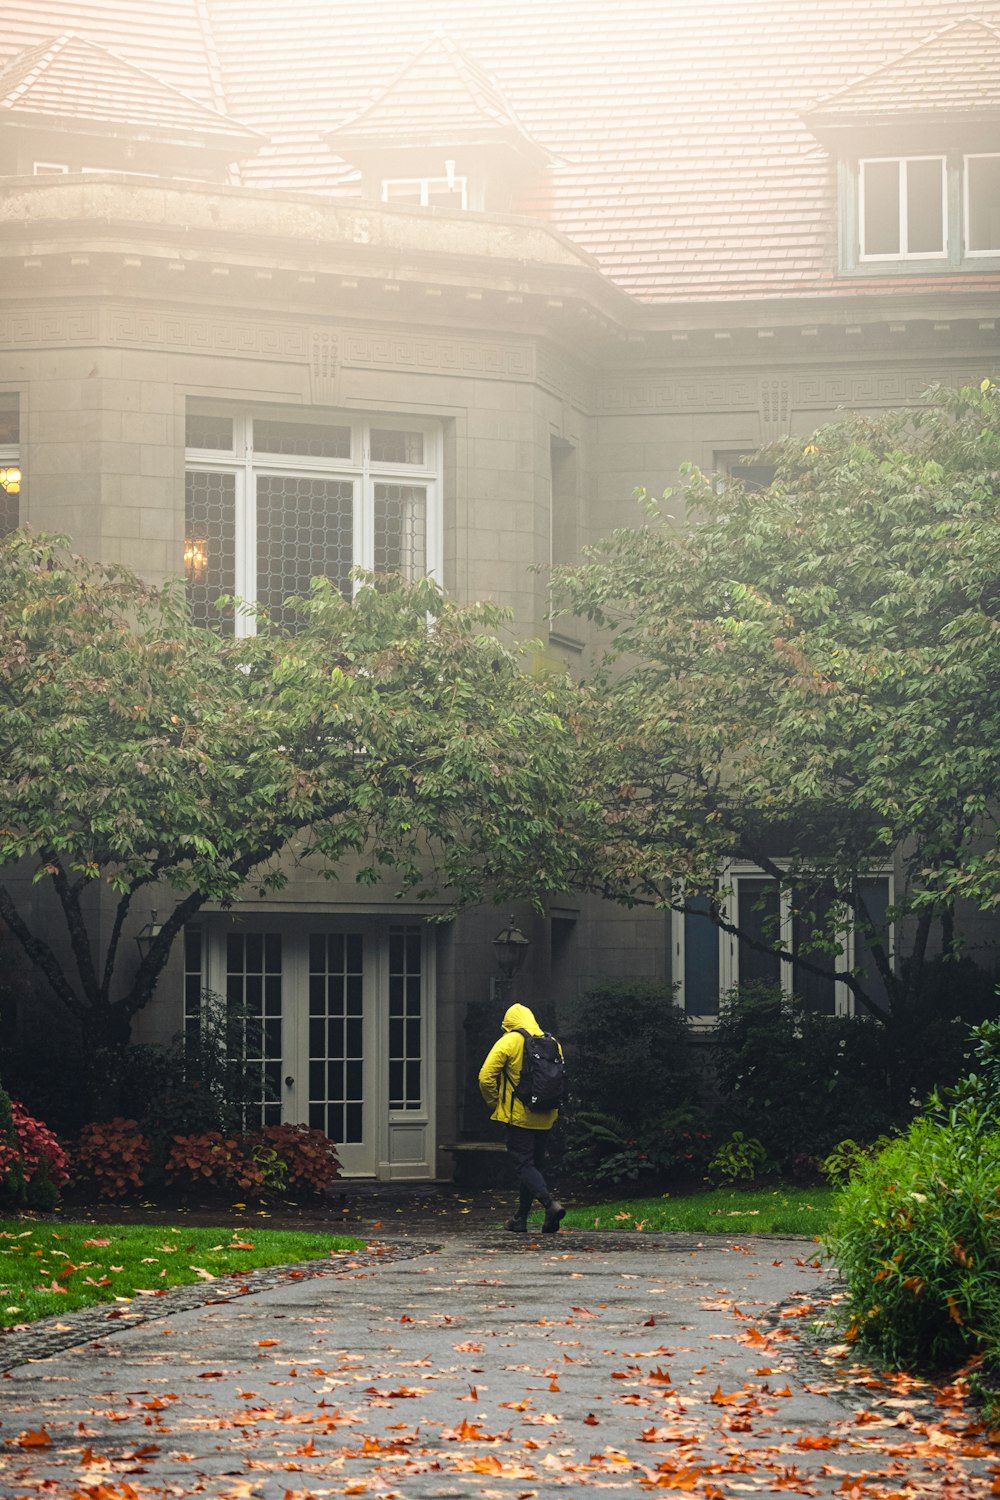 a person in a yellow jacket is walking in front of a house